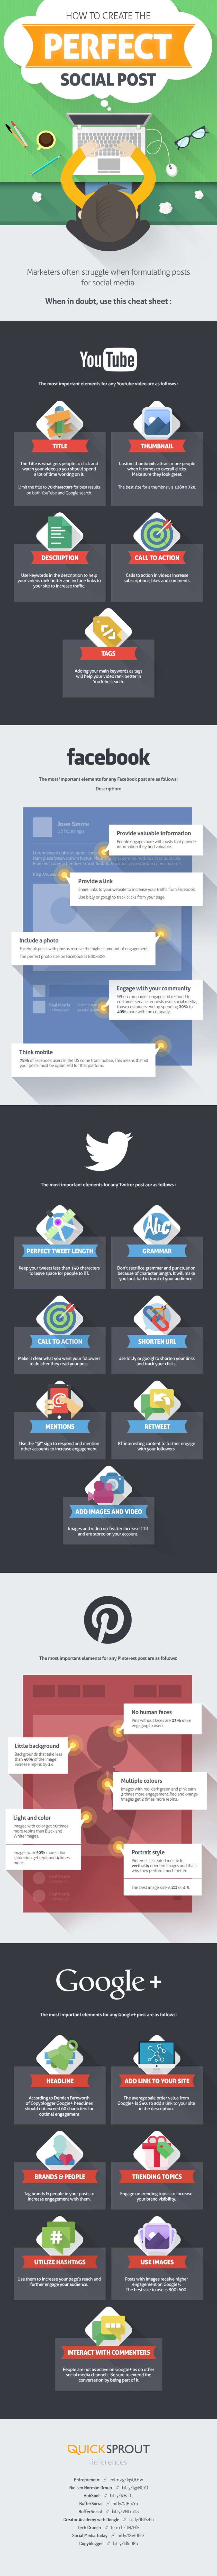 Infographic - How To Create The Perfect Social Media Post (Cheat Sheet) - CrazyEgg | The MarTech Digest | Scoop.it